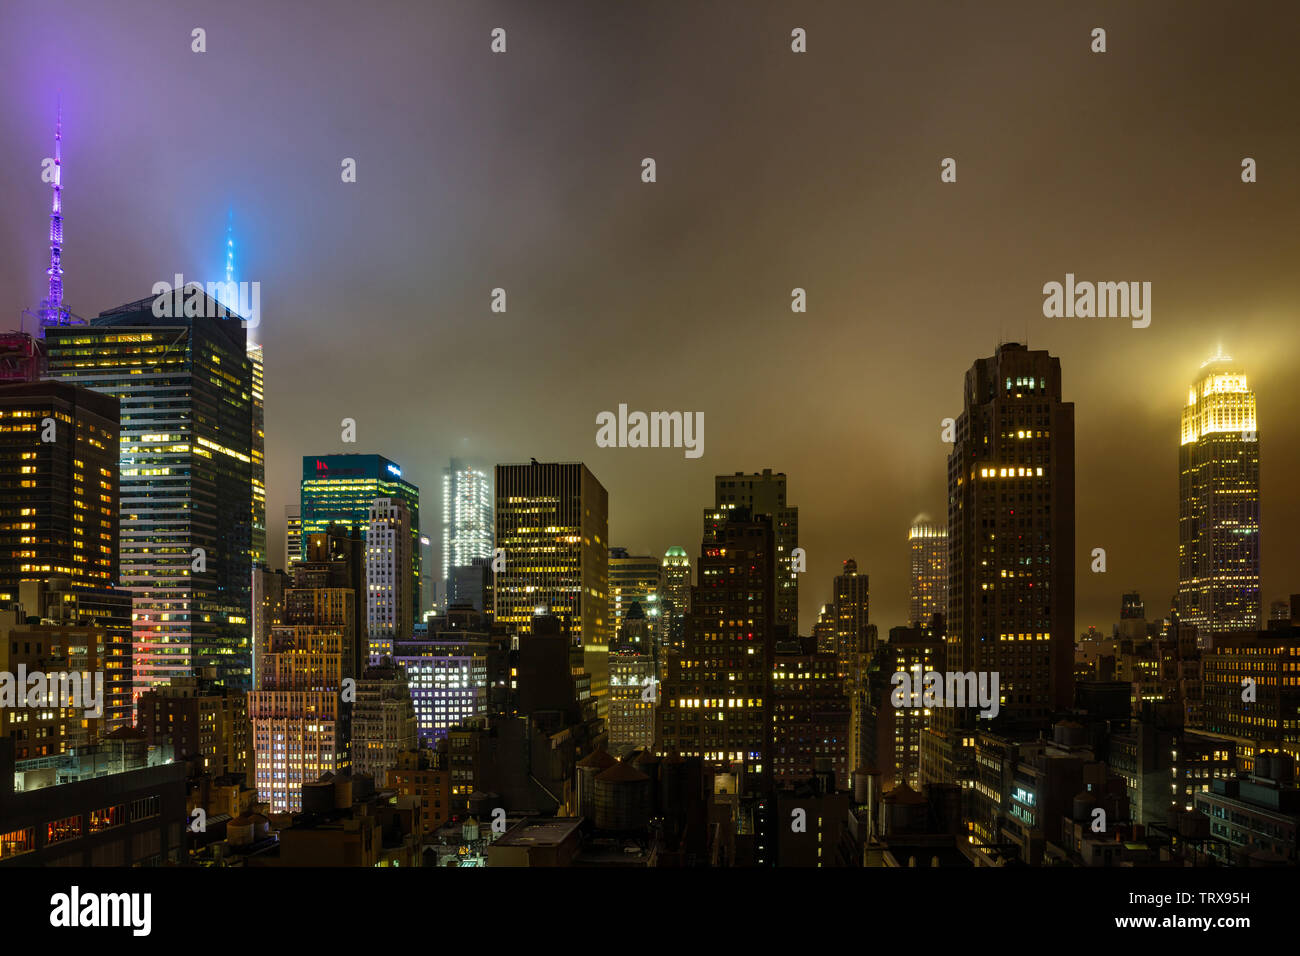 New York city skyline at night. Aerial view of Manhattan skyscrapers and Empire state building, illuminated Stock Photo